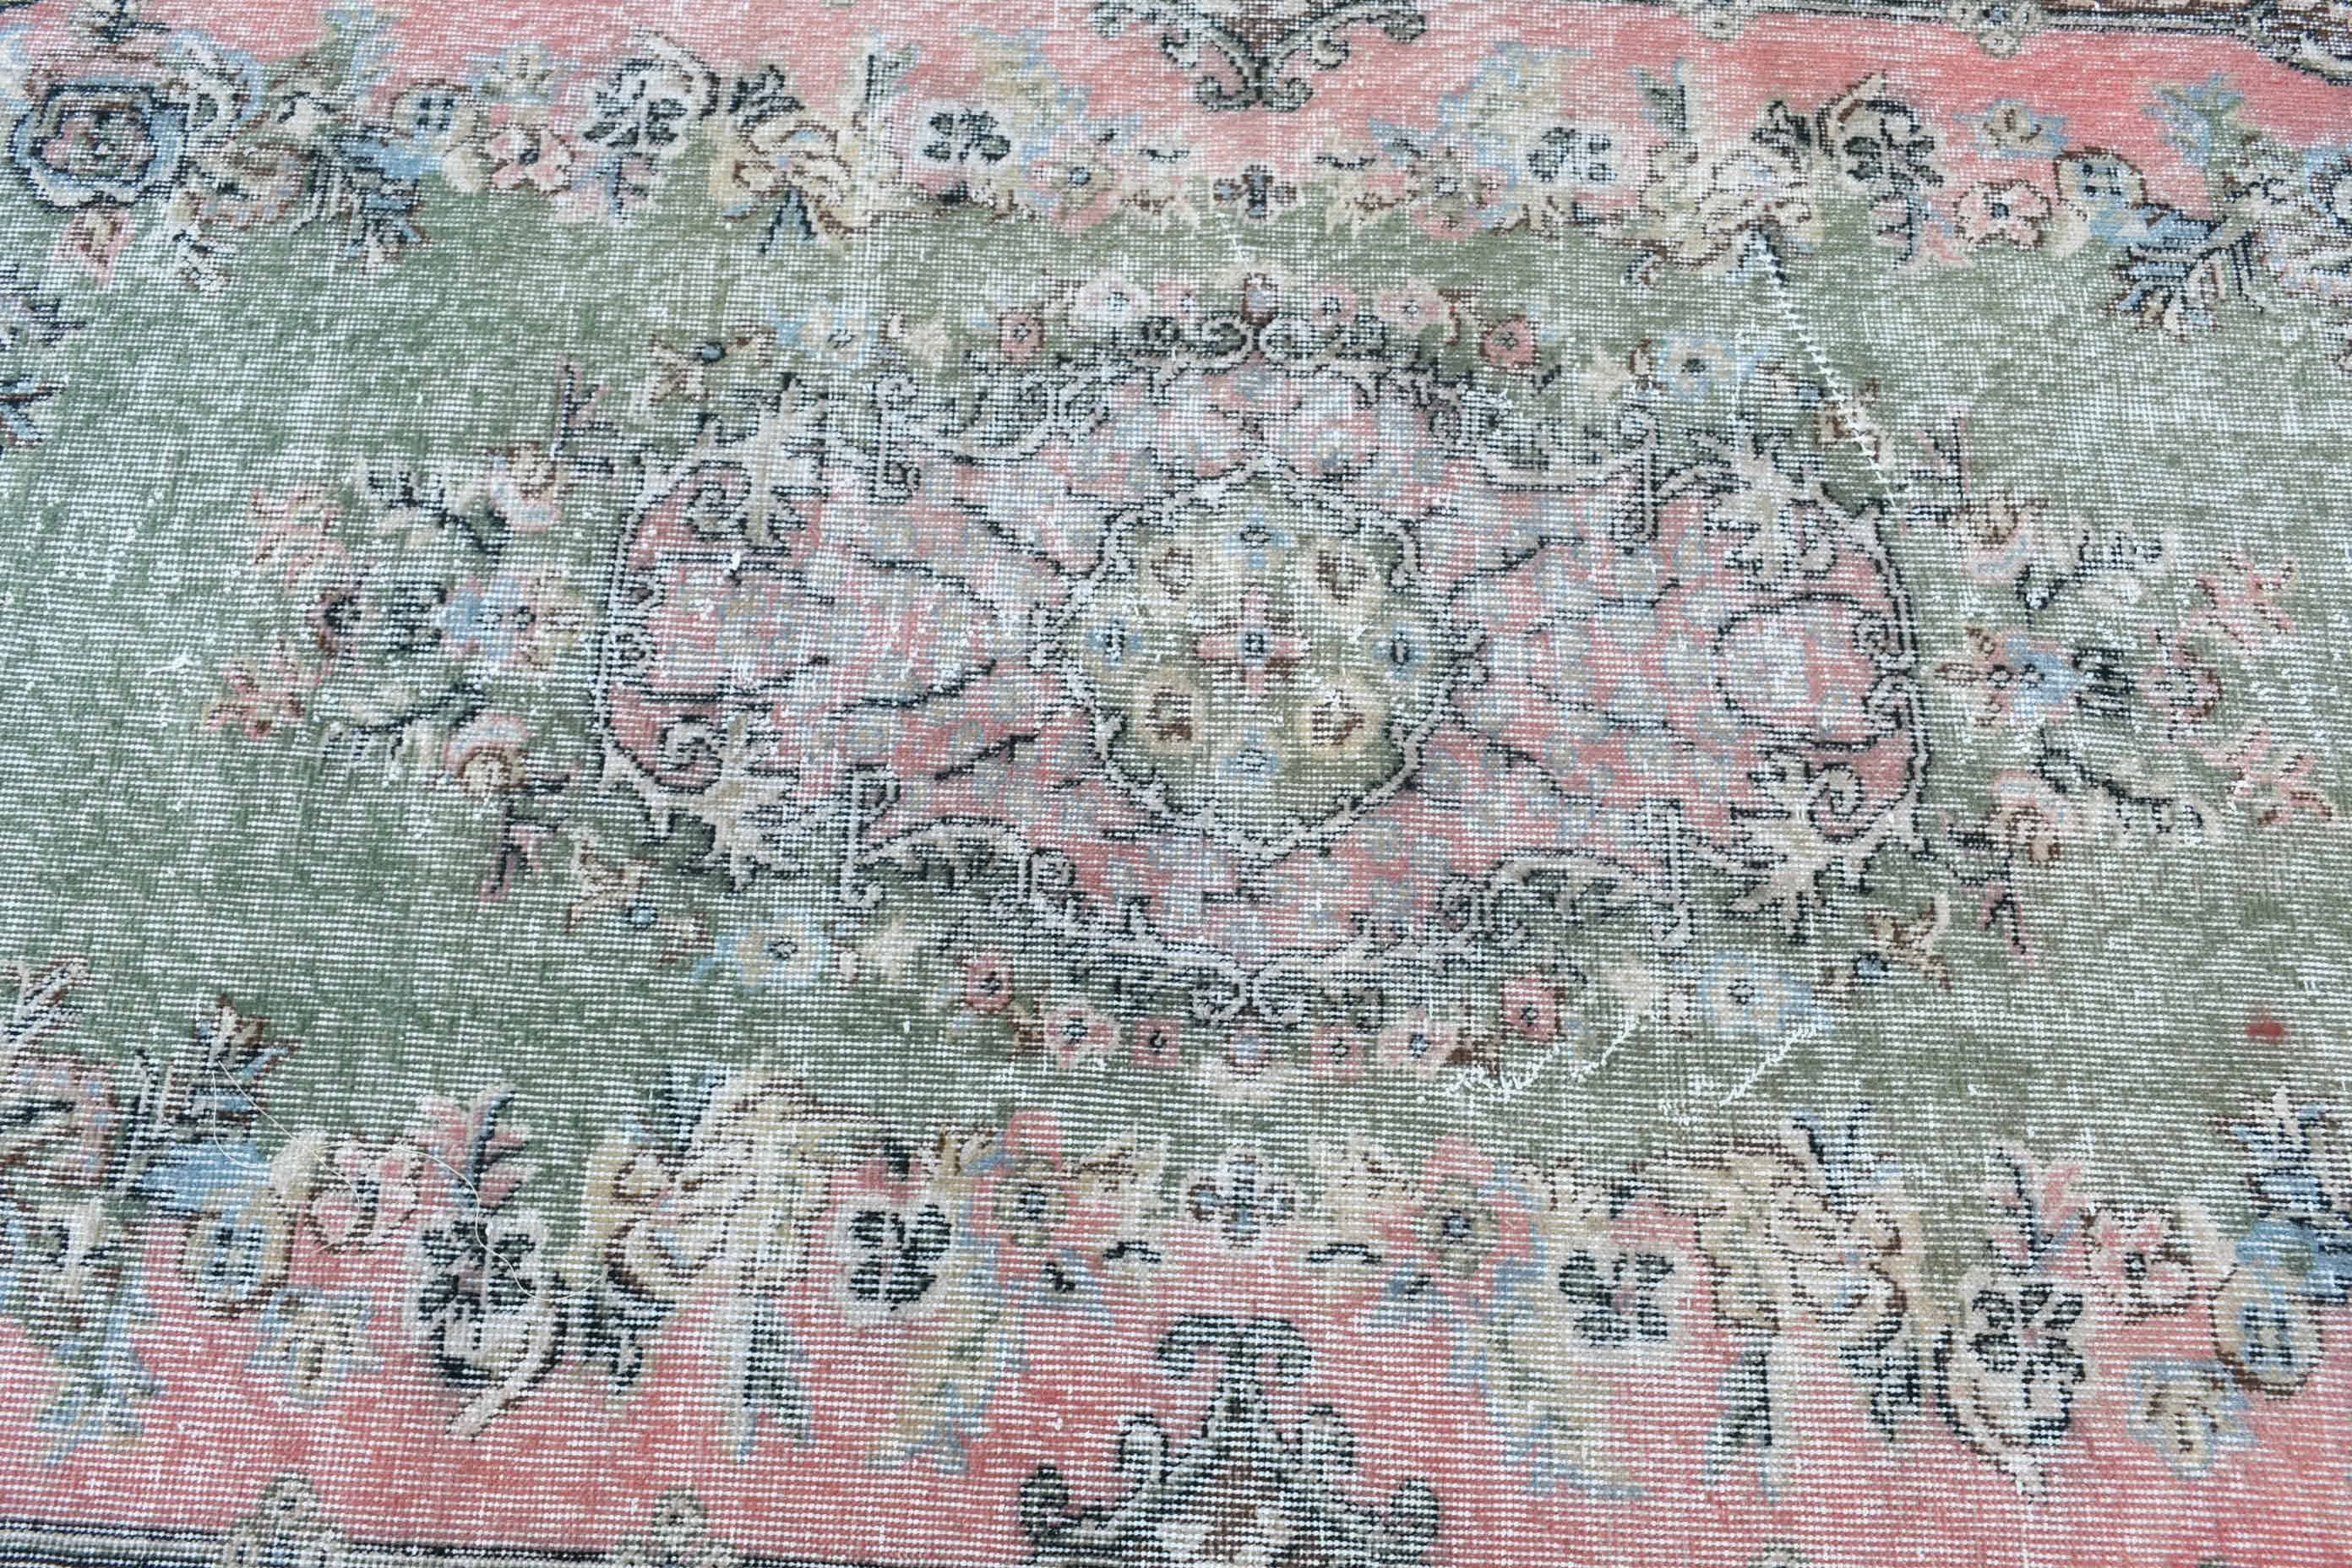 Vintage Rugs, 3.9x6.9 ft Area Rugs, Rugs for Area, Pink Wool Rugs, Kitchen Rug, Turkish Rugs, Bedroom Rugs, Antique Rugs